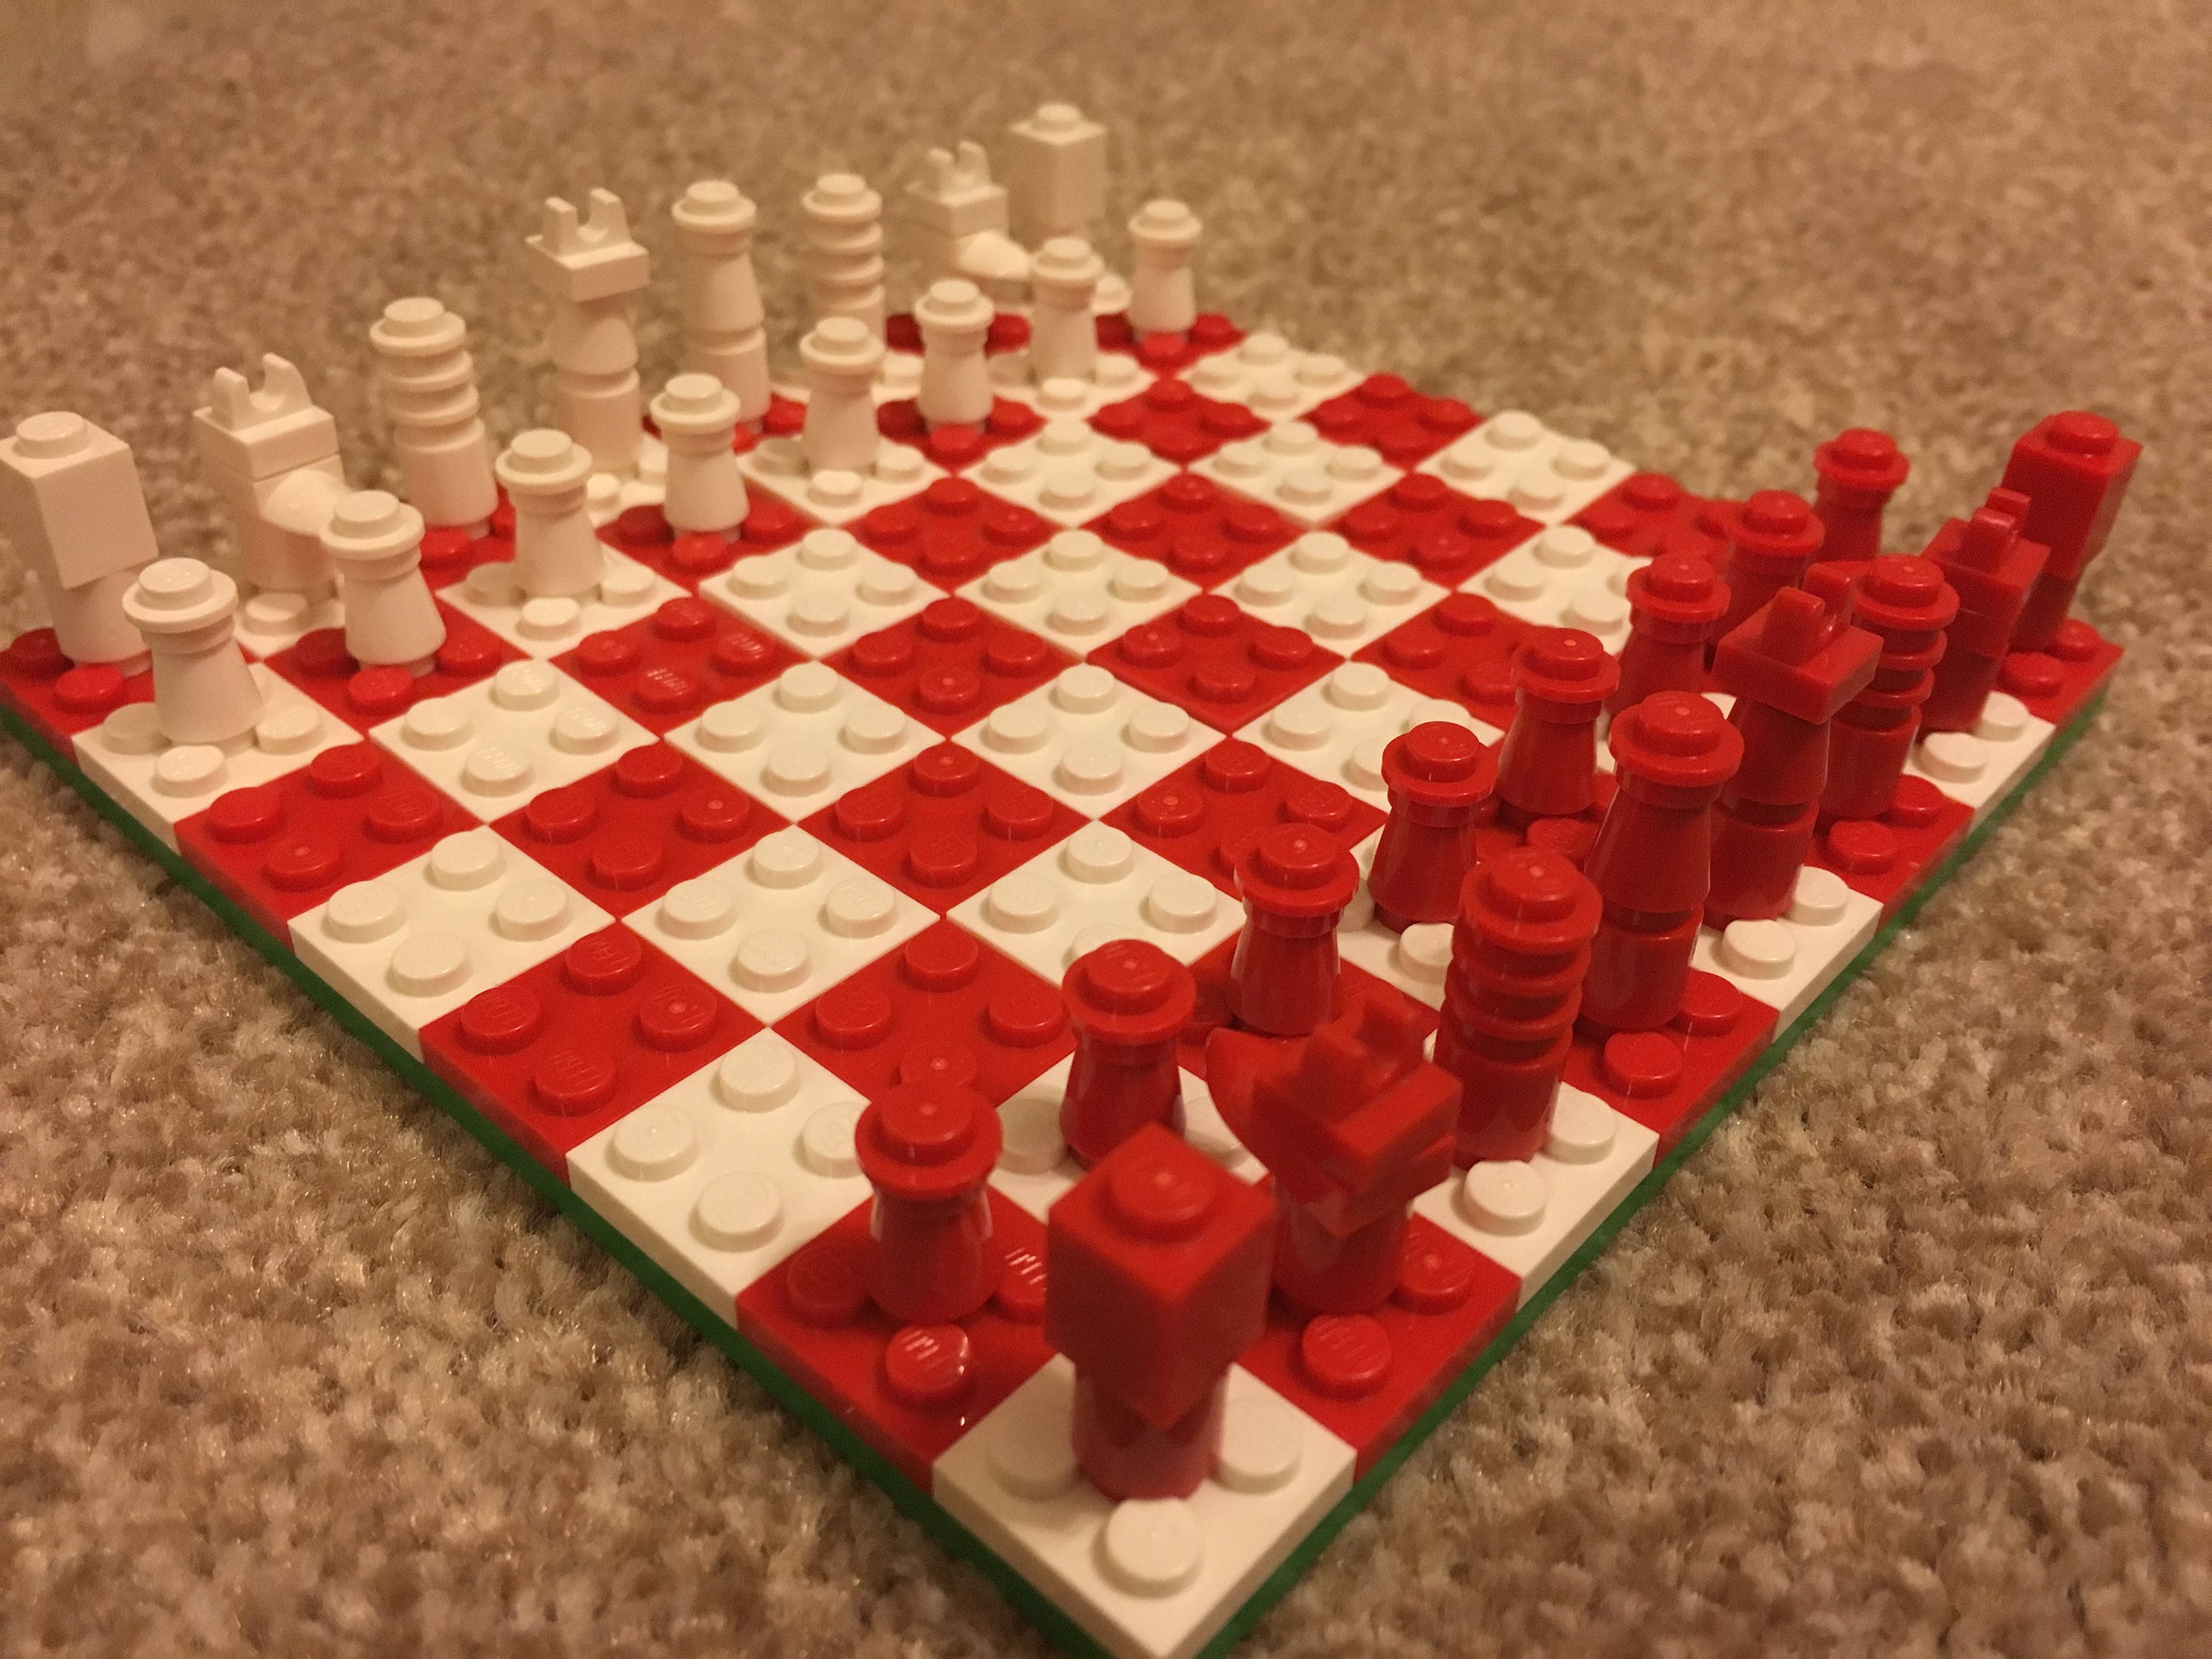 If you are bad at chess you can always play it with Lego : r/chess